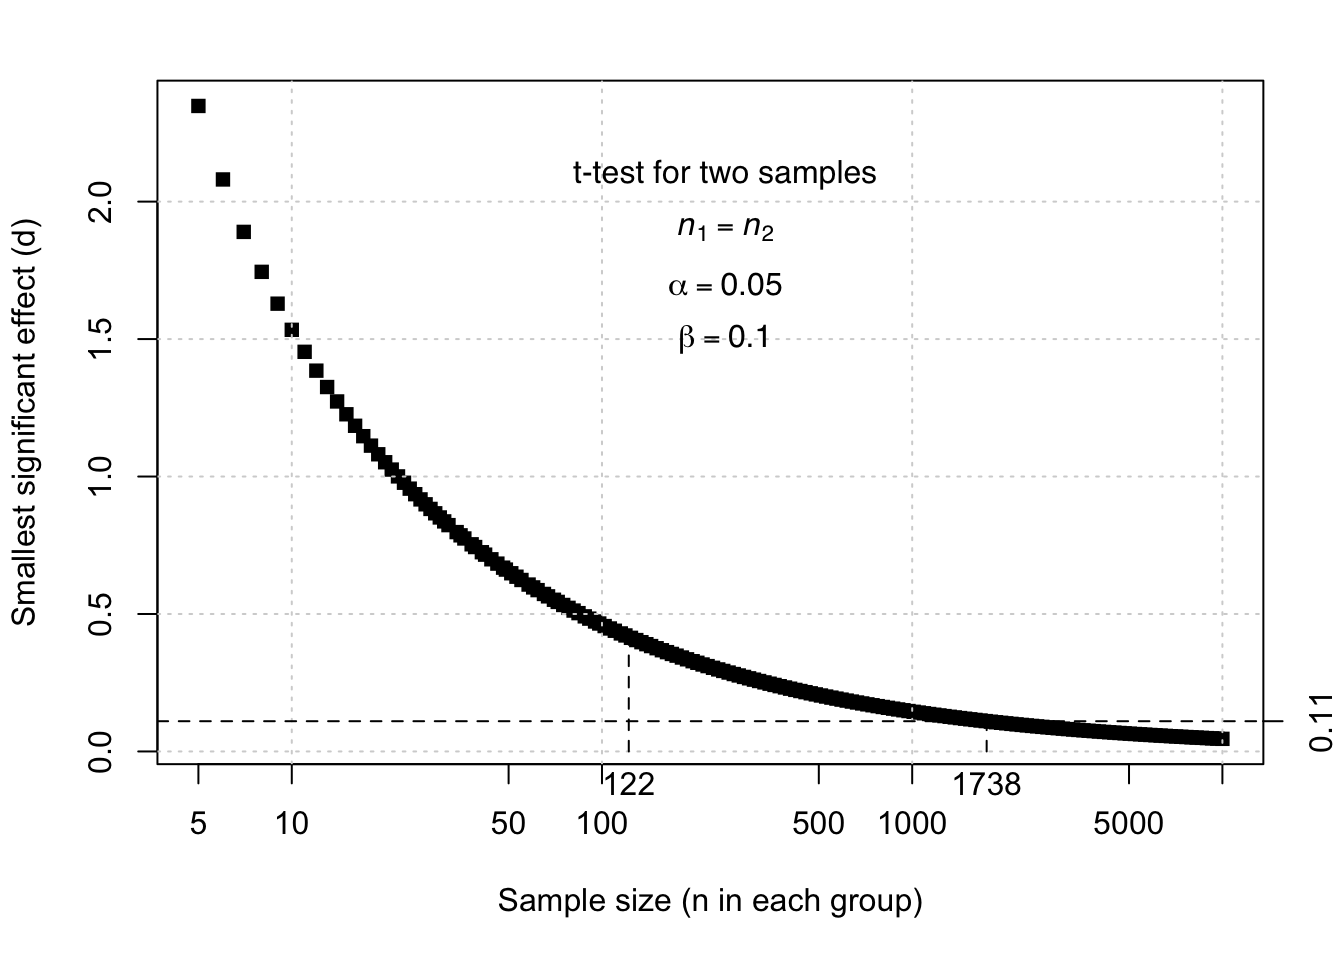 Relation between the sample size and the smallest effect (d) that is significant according to a *t*-test for unpaired, independent observations, with errors probabilities alpha=.05 and beta=.10.